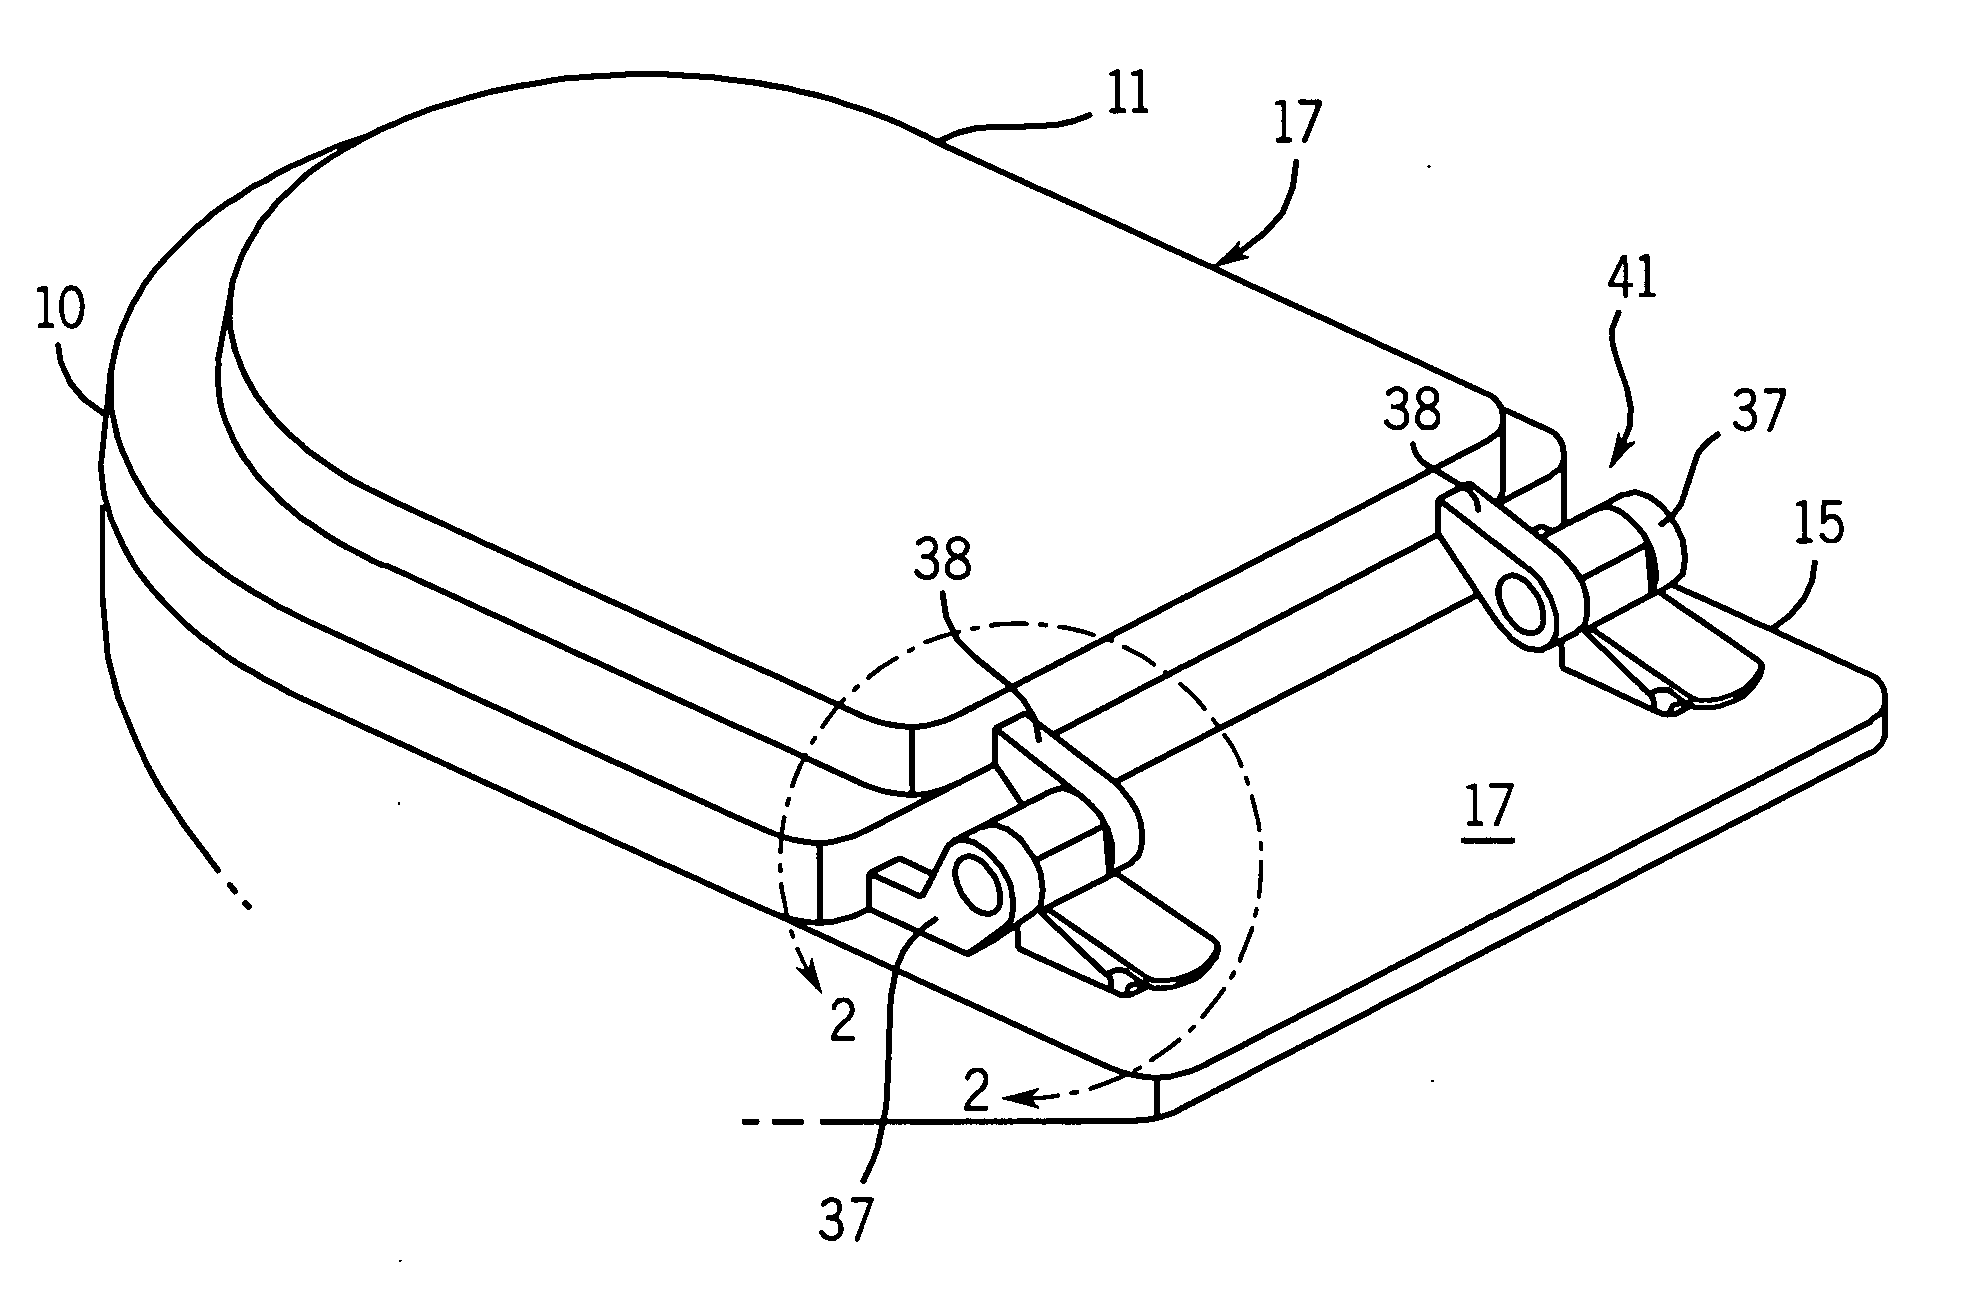 Releasable toilet seat hinge assembly